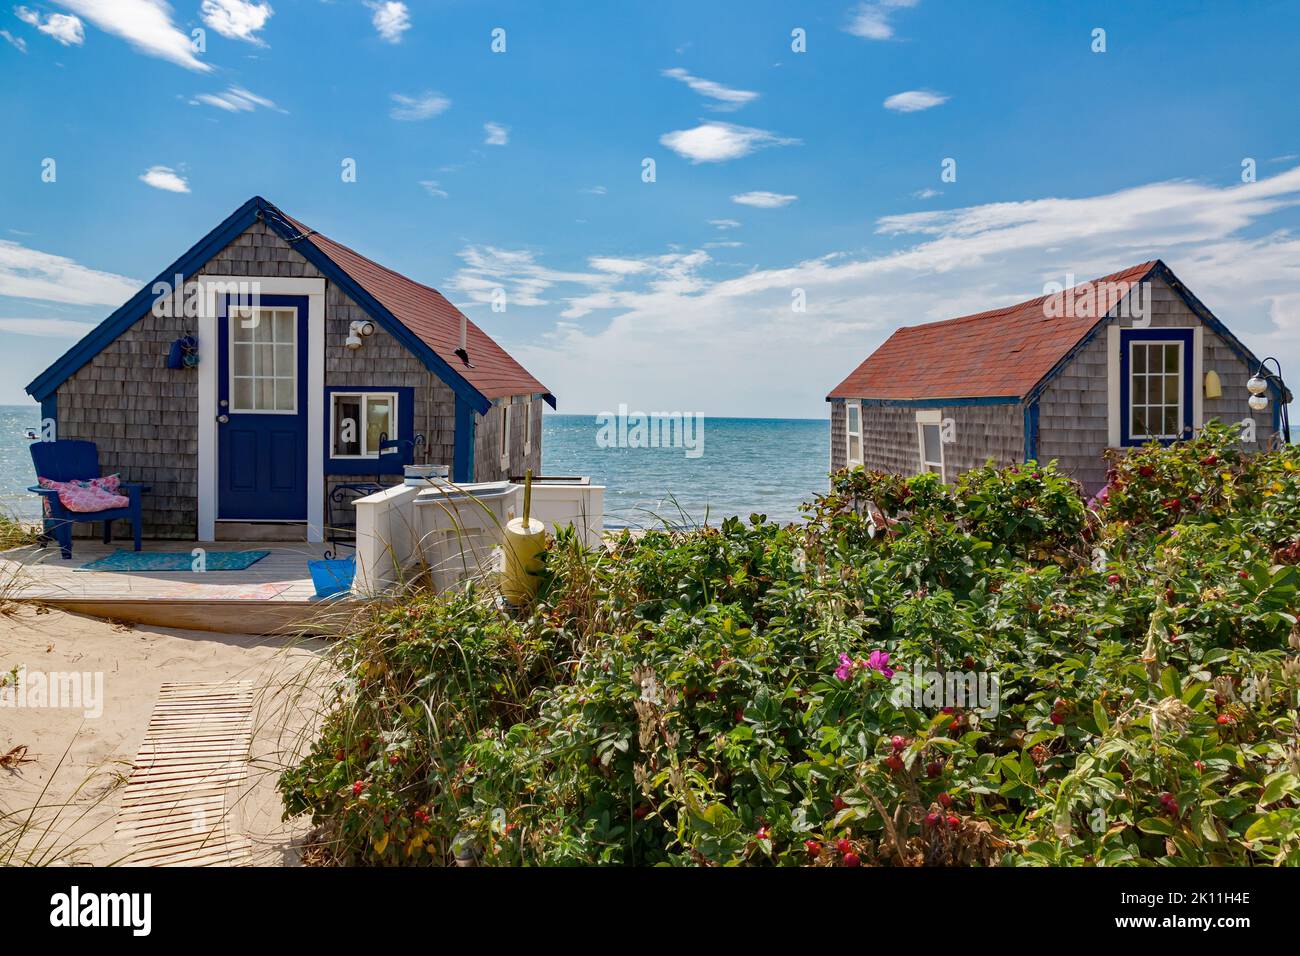 Cottages at Cold Storage Beach in Truro, Barnstable County, Cape Cod, Massachusetts, USA. Stockfoto